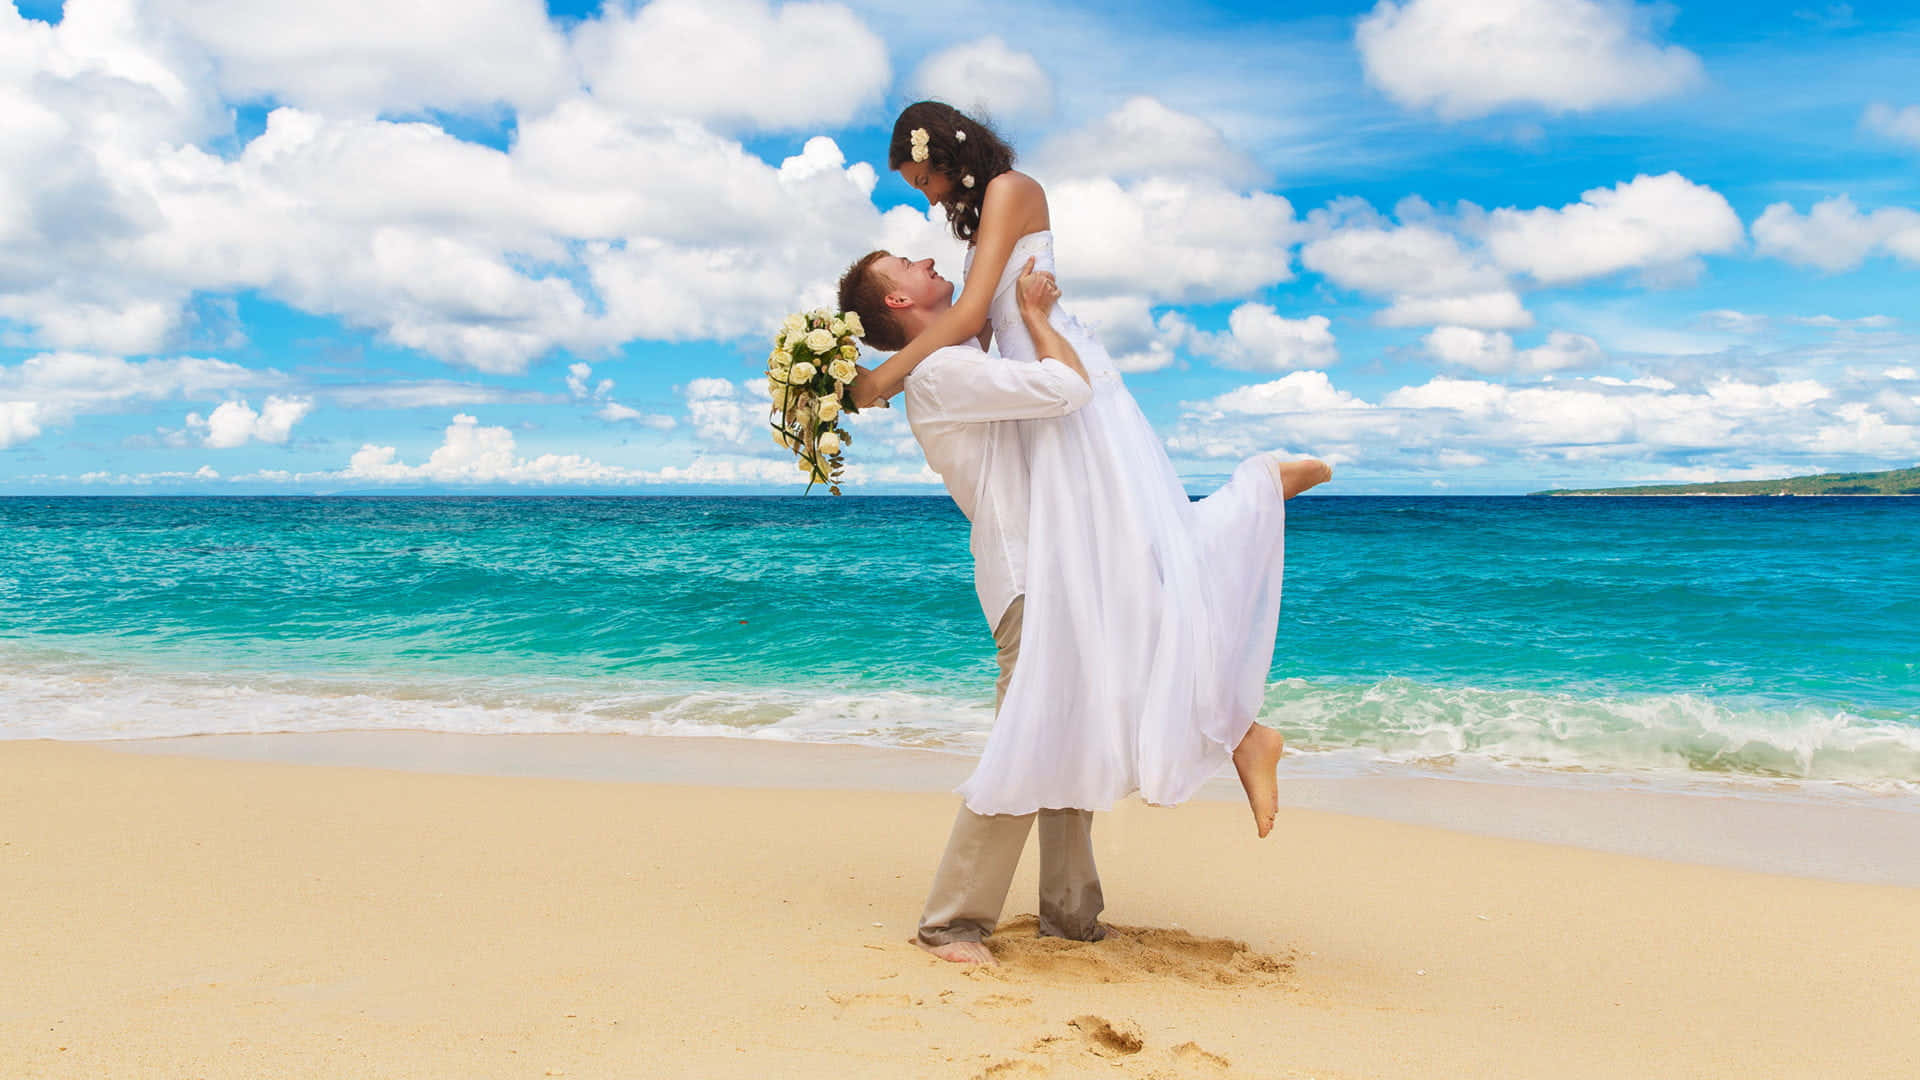 "Serenity in Matrimony: Captivating Beach Wedding Picture"